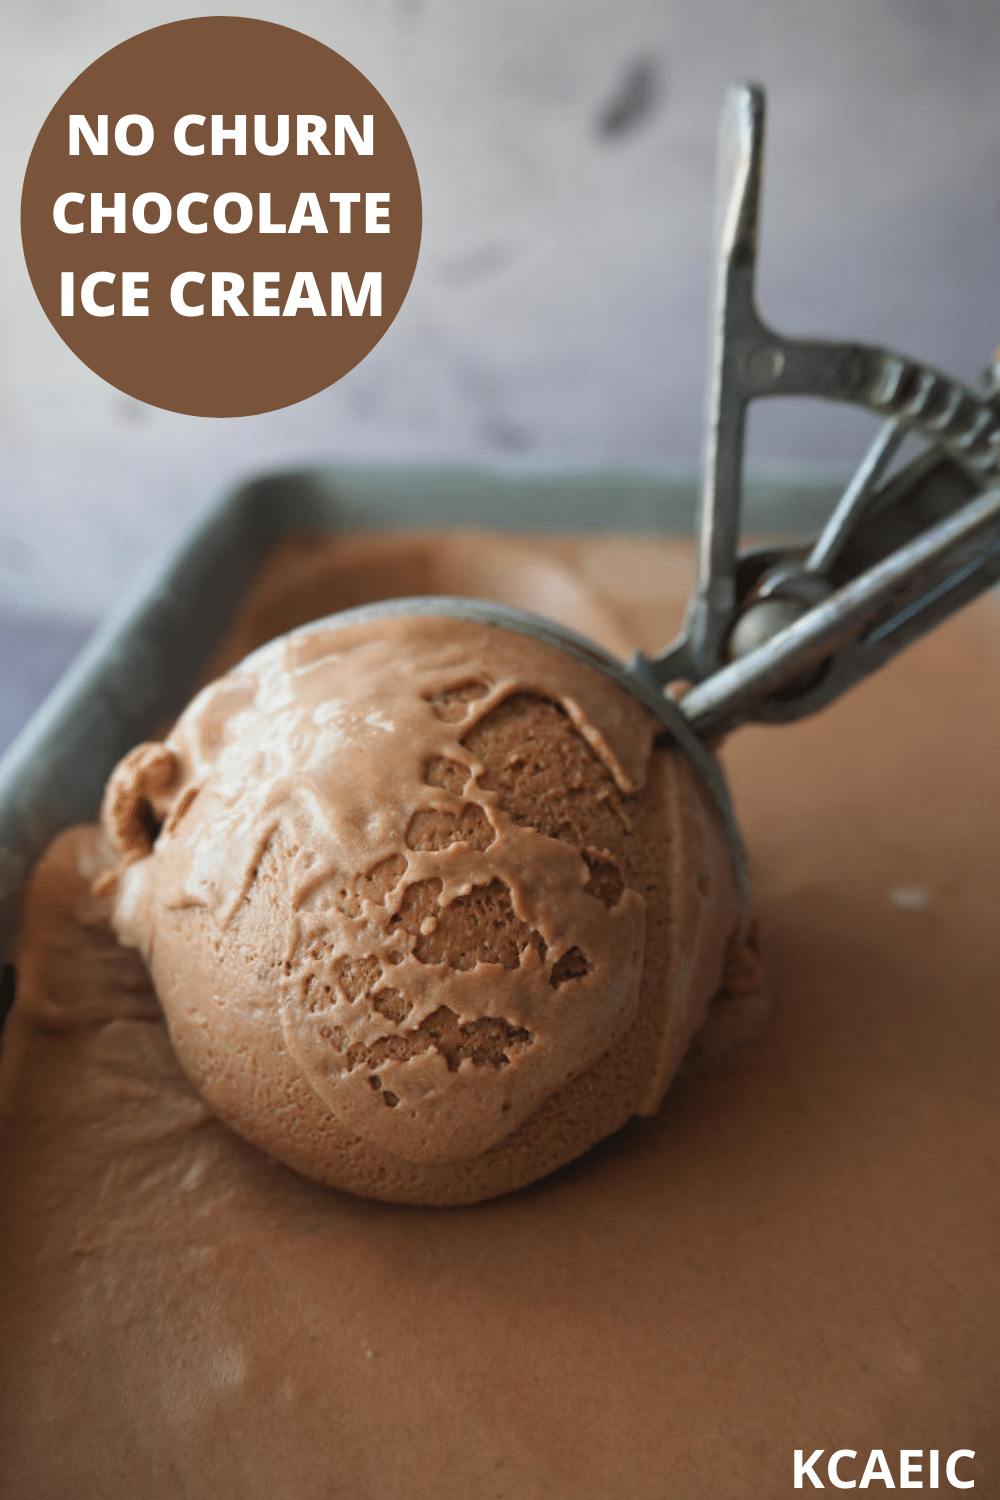 Close up of no churn chocolate ice cream in pan being scooped, with text overlay, no churn chocolate ice cream, KCAEIC, with grey back ground.